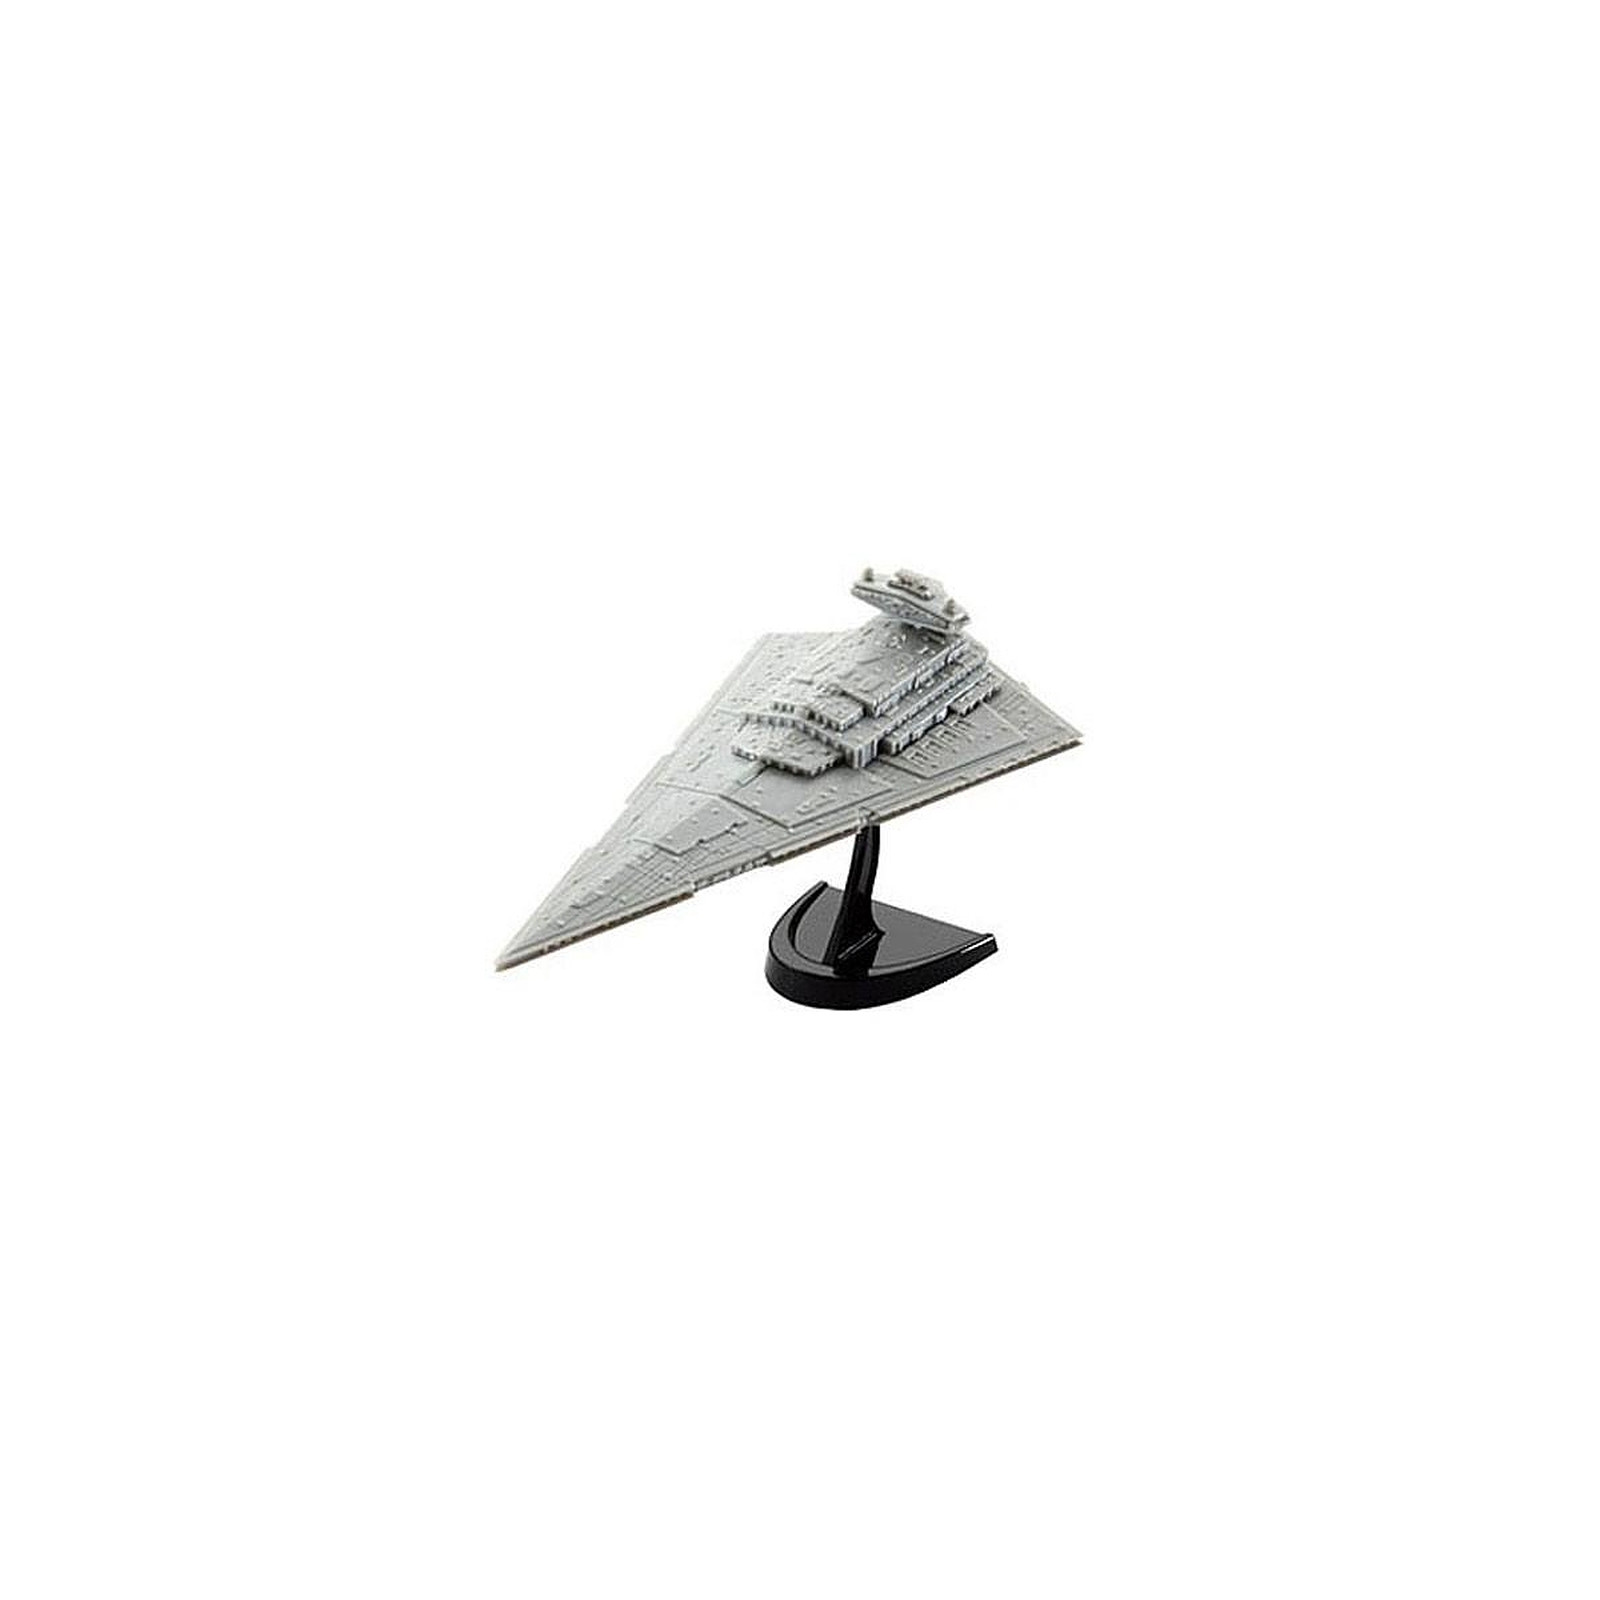 Star Wars - Maquette 1/12300 Imperial Star Destroyer 13 cm - Figurines Revell